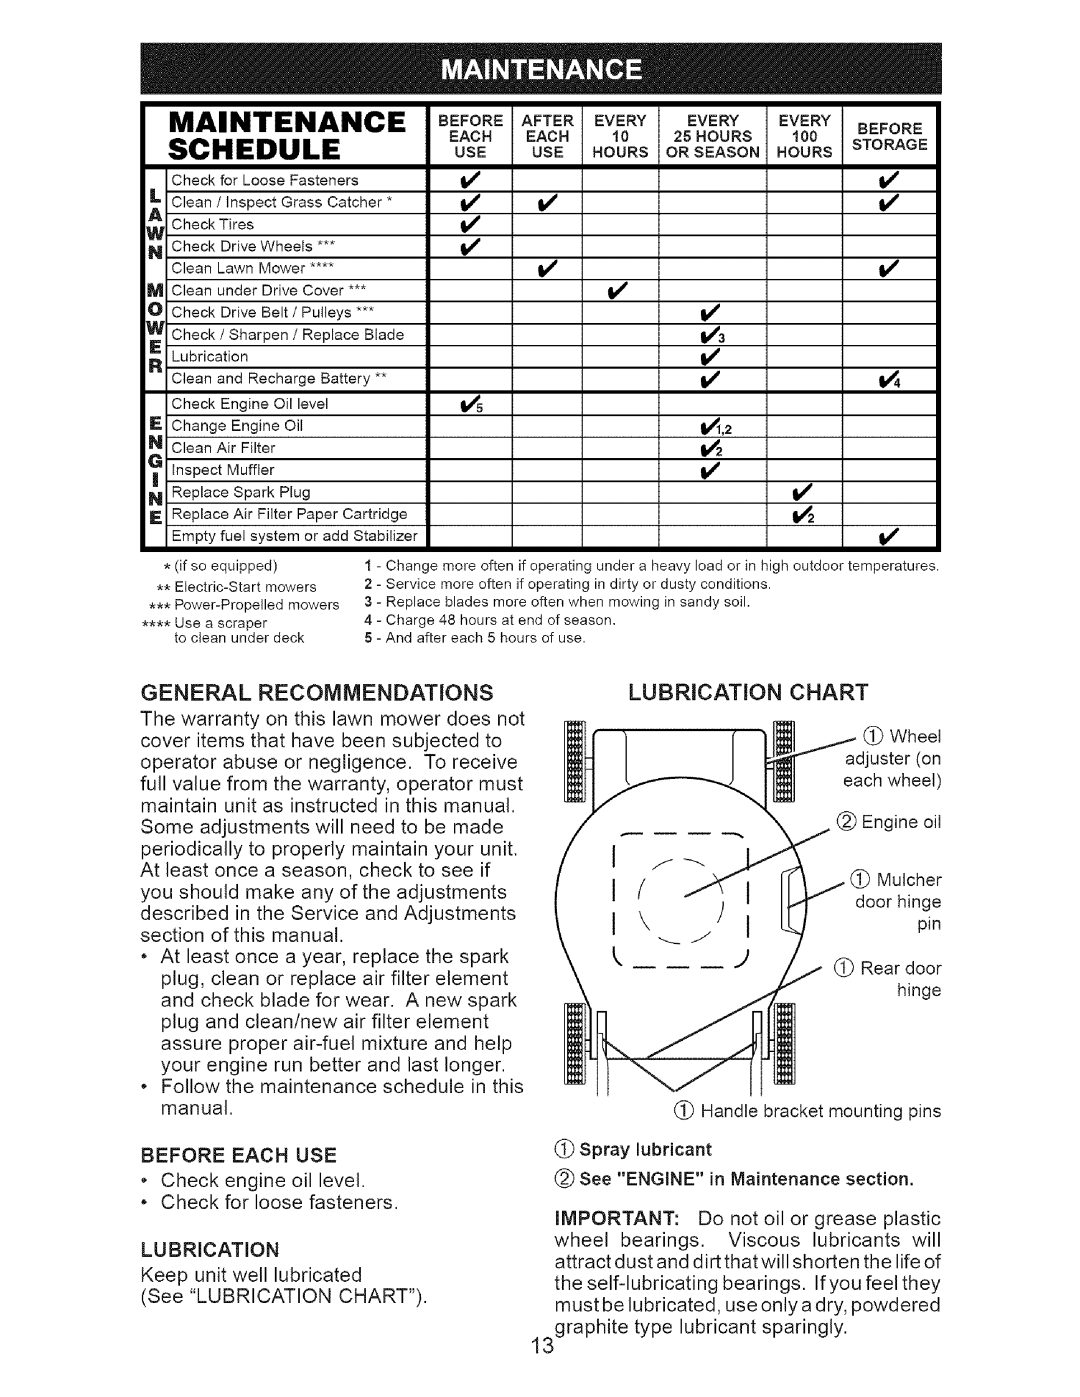 Craftsman 917.37648 manual General Recommendations, Before Each USE, Lubrication 